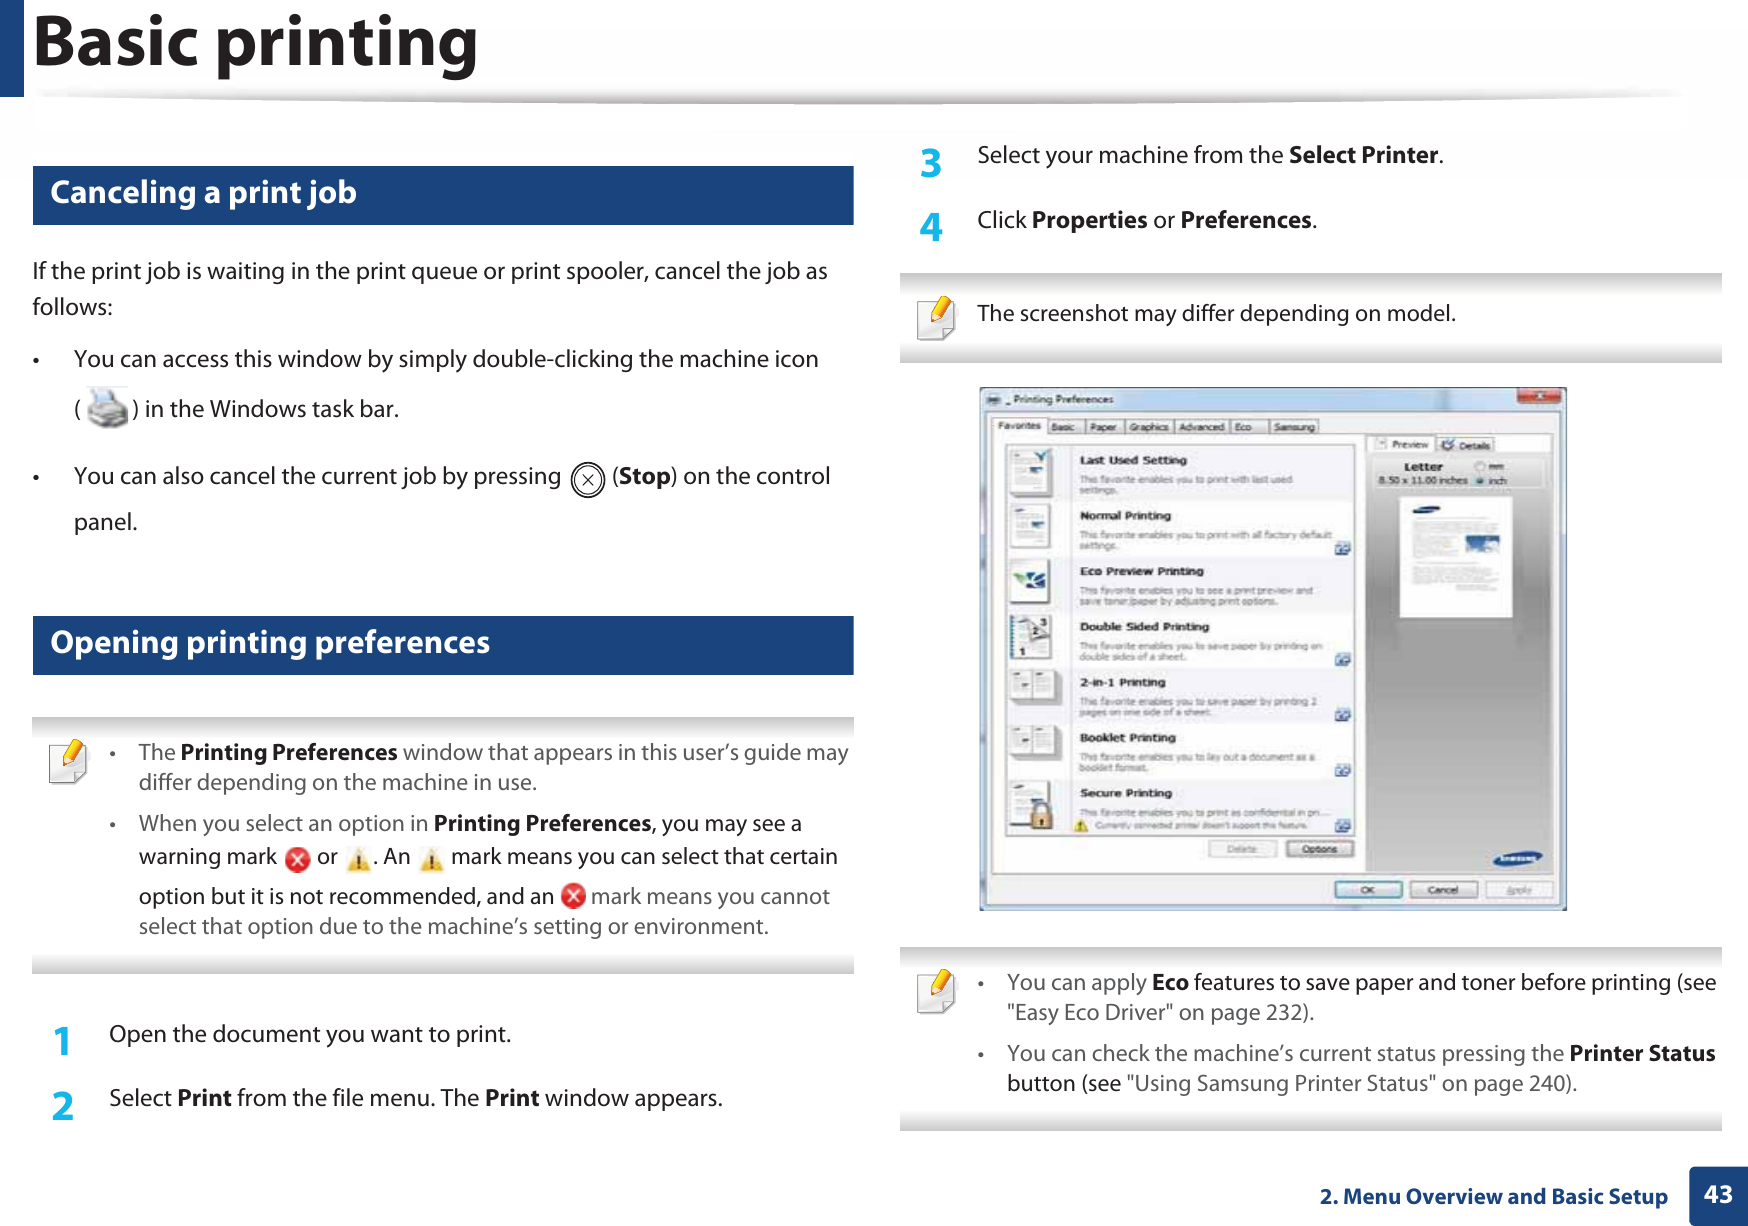 Basic printing432. Menu Overview and Basic Setup8 Canceling a print jobIf the print job is waiting in the print queue or print spooler, cancel the job as follows:• You can access this window by simply double-clicking the machine icon ( ) in the Windows task bar. • You can also cancel the current job by pressing  (Stop) on the control panel.9 Opening printing preferences • The Printing Preferences window that appears in this user’s guide may differ depending on the machine in use. • When you select an option in Printing Preferences, you may see a warning mark   or  . An   mark means you can select that certain option but it is not recommended, and an   mark means you cannot select that option due to the machine’s setting or environment. 1Open the document you want to print.2  Select Print from the file menu. The Print window appears. 3  Select your machine from the Select Printer. 4  Click Properties or Preferences.  The screenshot may differ depending on model.  • You can apply Eco features to save paper and toner before printing (see &quot;Easy Eco Driver&quot; on page 232).• You can check the machine’s current status pressing the Printer Status button (see &quot;Using Samsung Printer Status&quot; on page 240). 